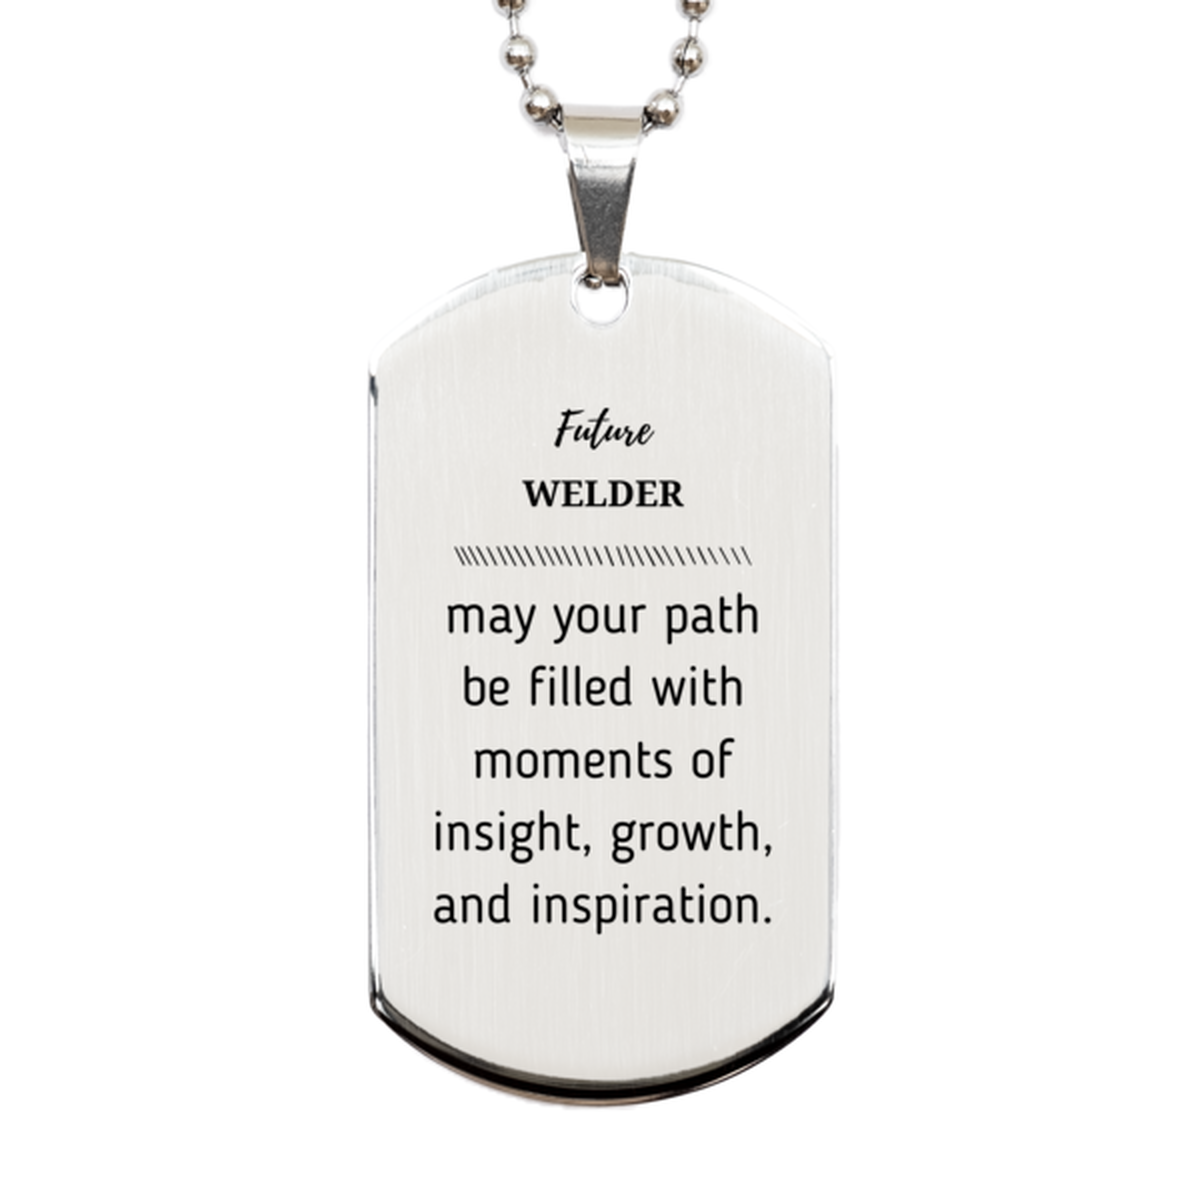 Future Welder Gifts, May your path be filled with moments of insight, Graduation Gifts for New Welder, Christmas Unique Silver Dog Tag For Men, Women, Friends